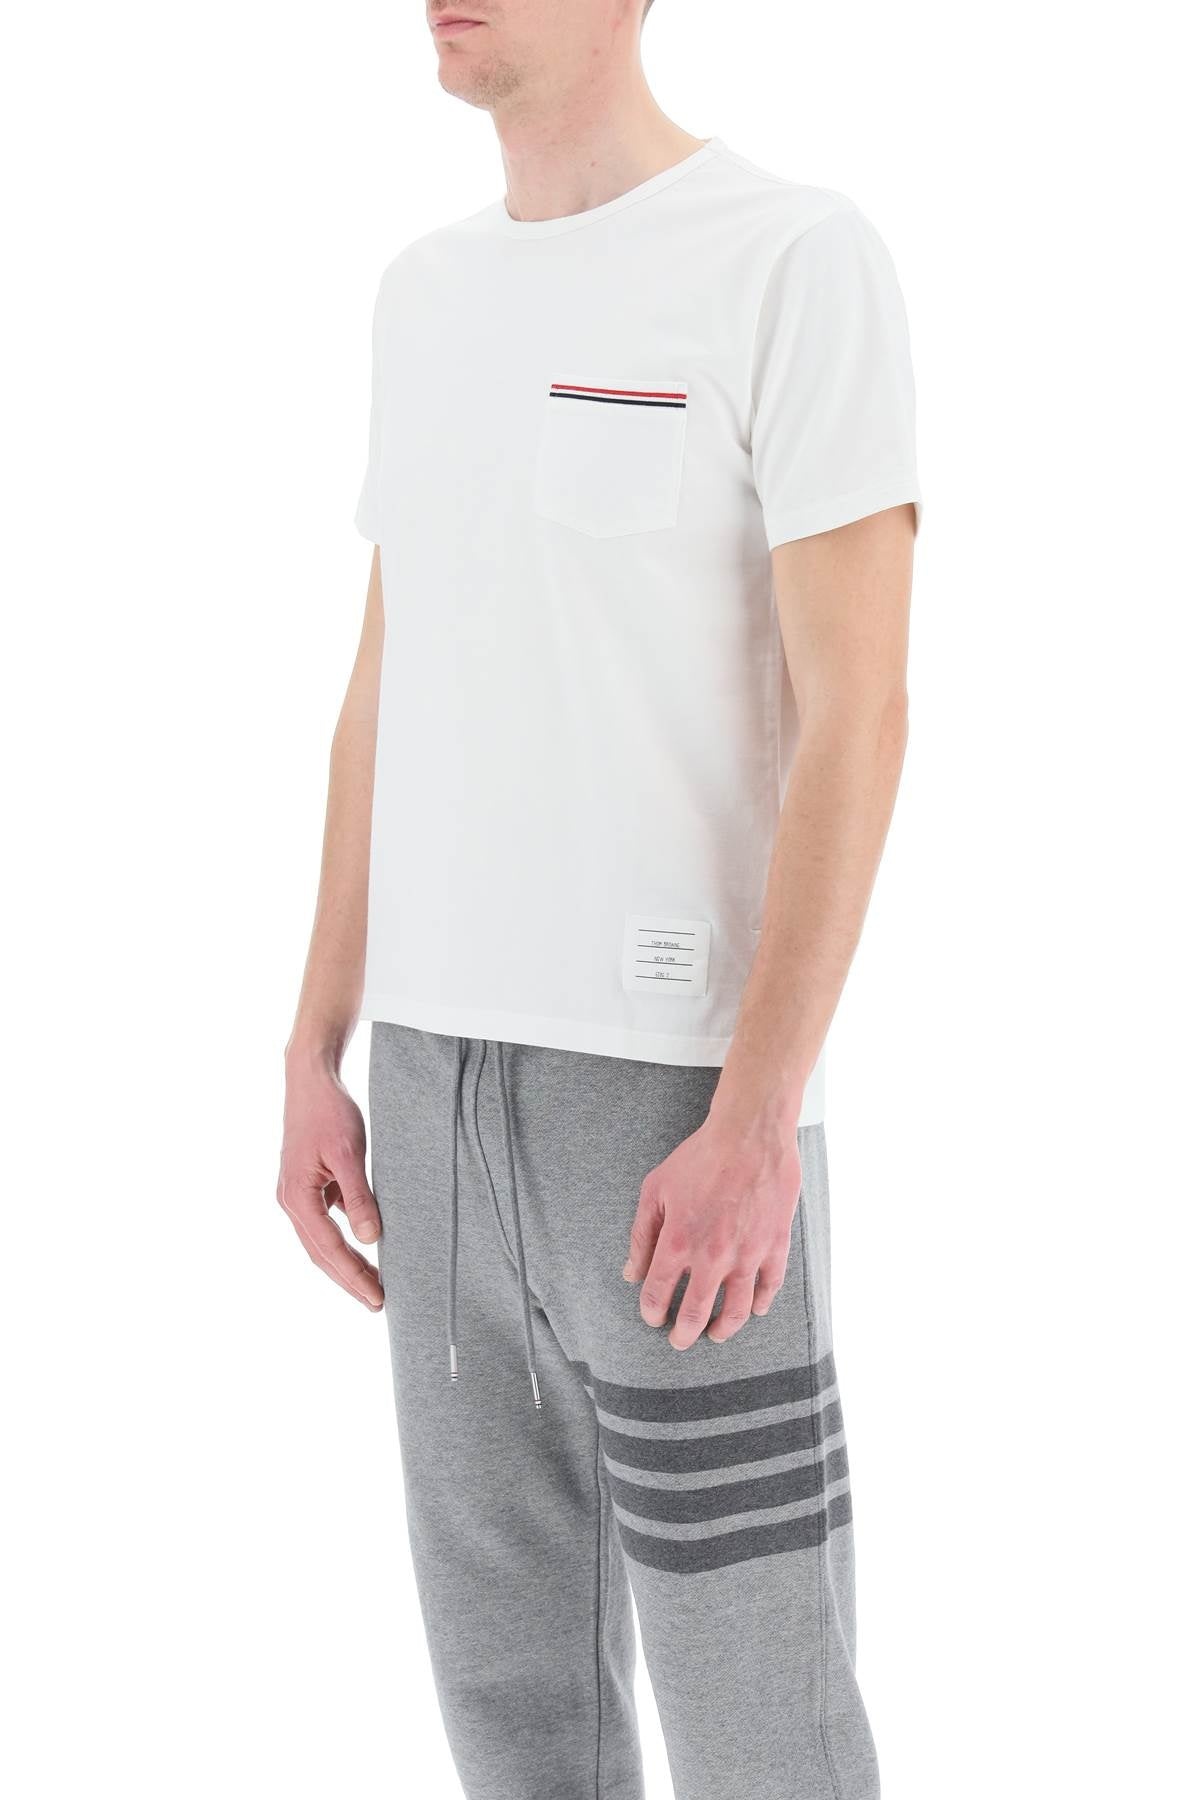 Thom Browne T-Shirt With Tricolor Pocket Men - 4